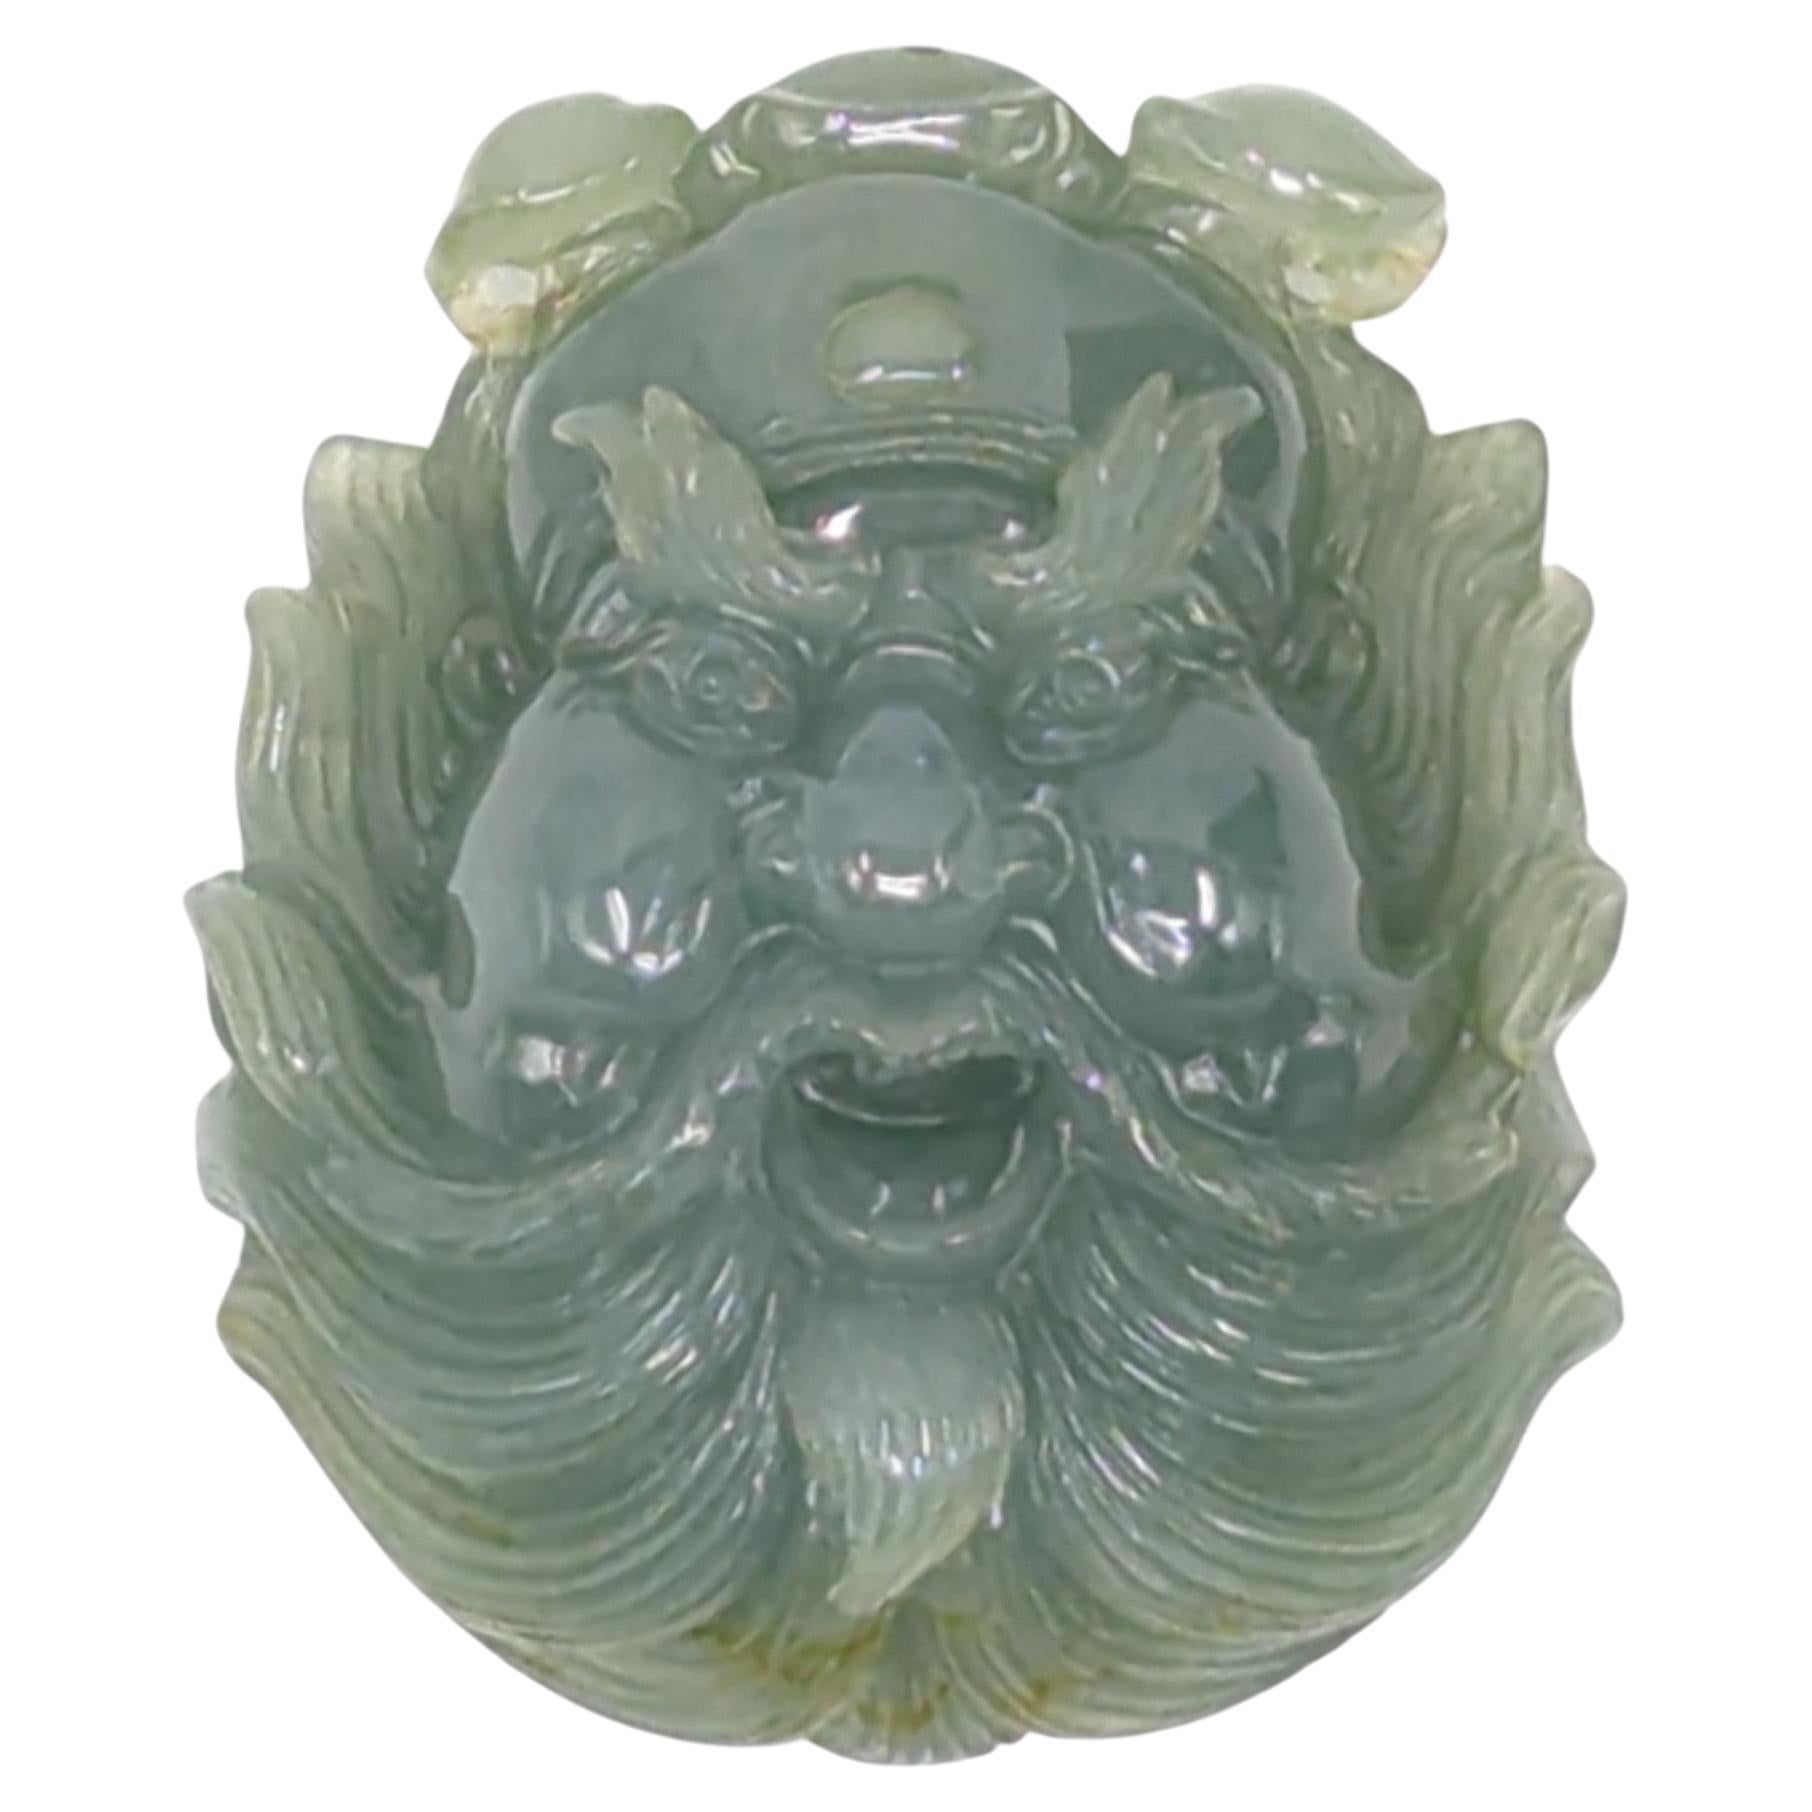 Large Chinese Suzhou Carved Jadeite Zhong Kui Demon Queller Pendant A-Grade For Sale